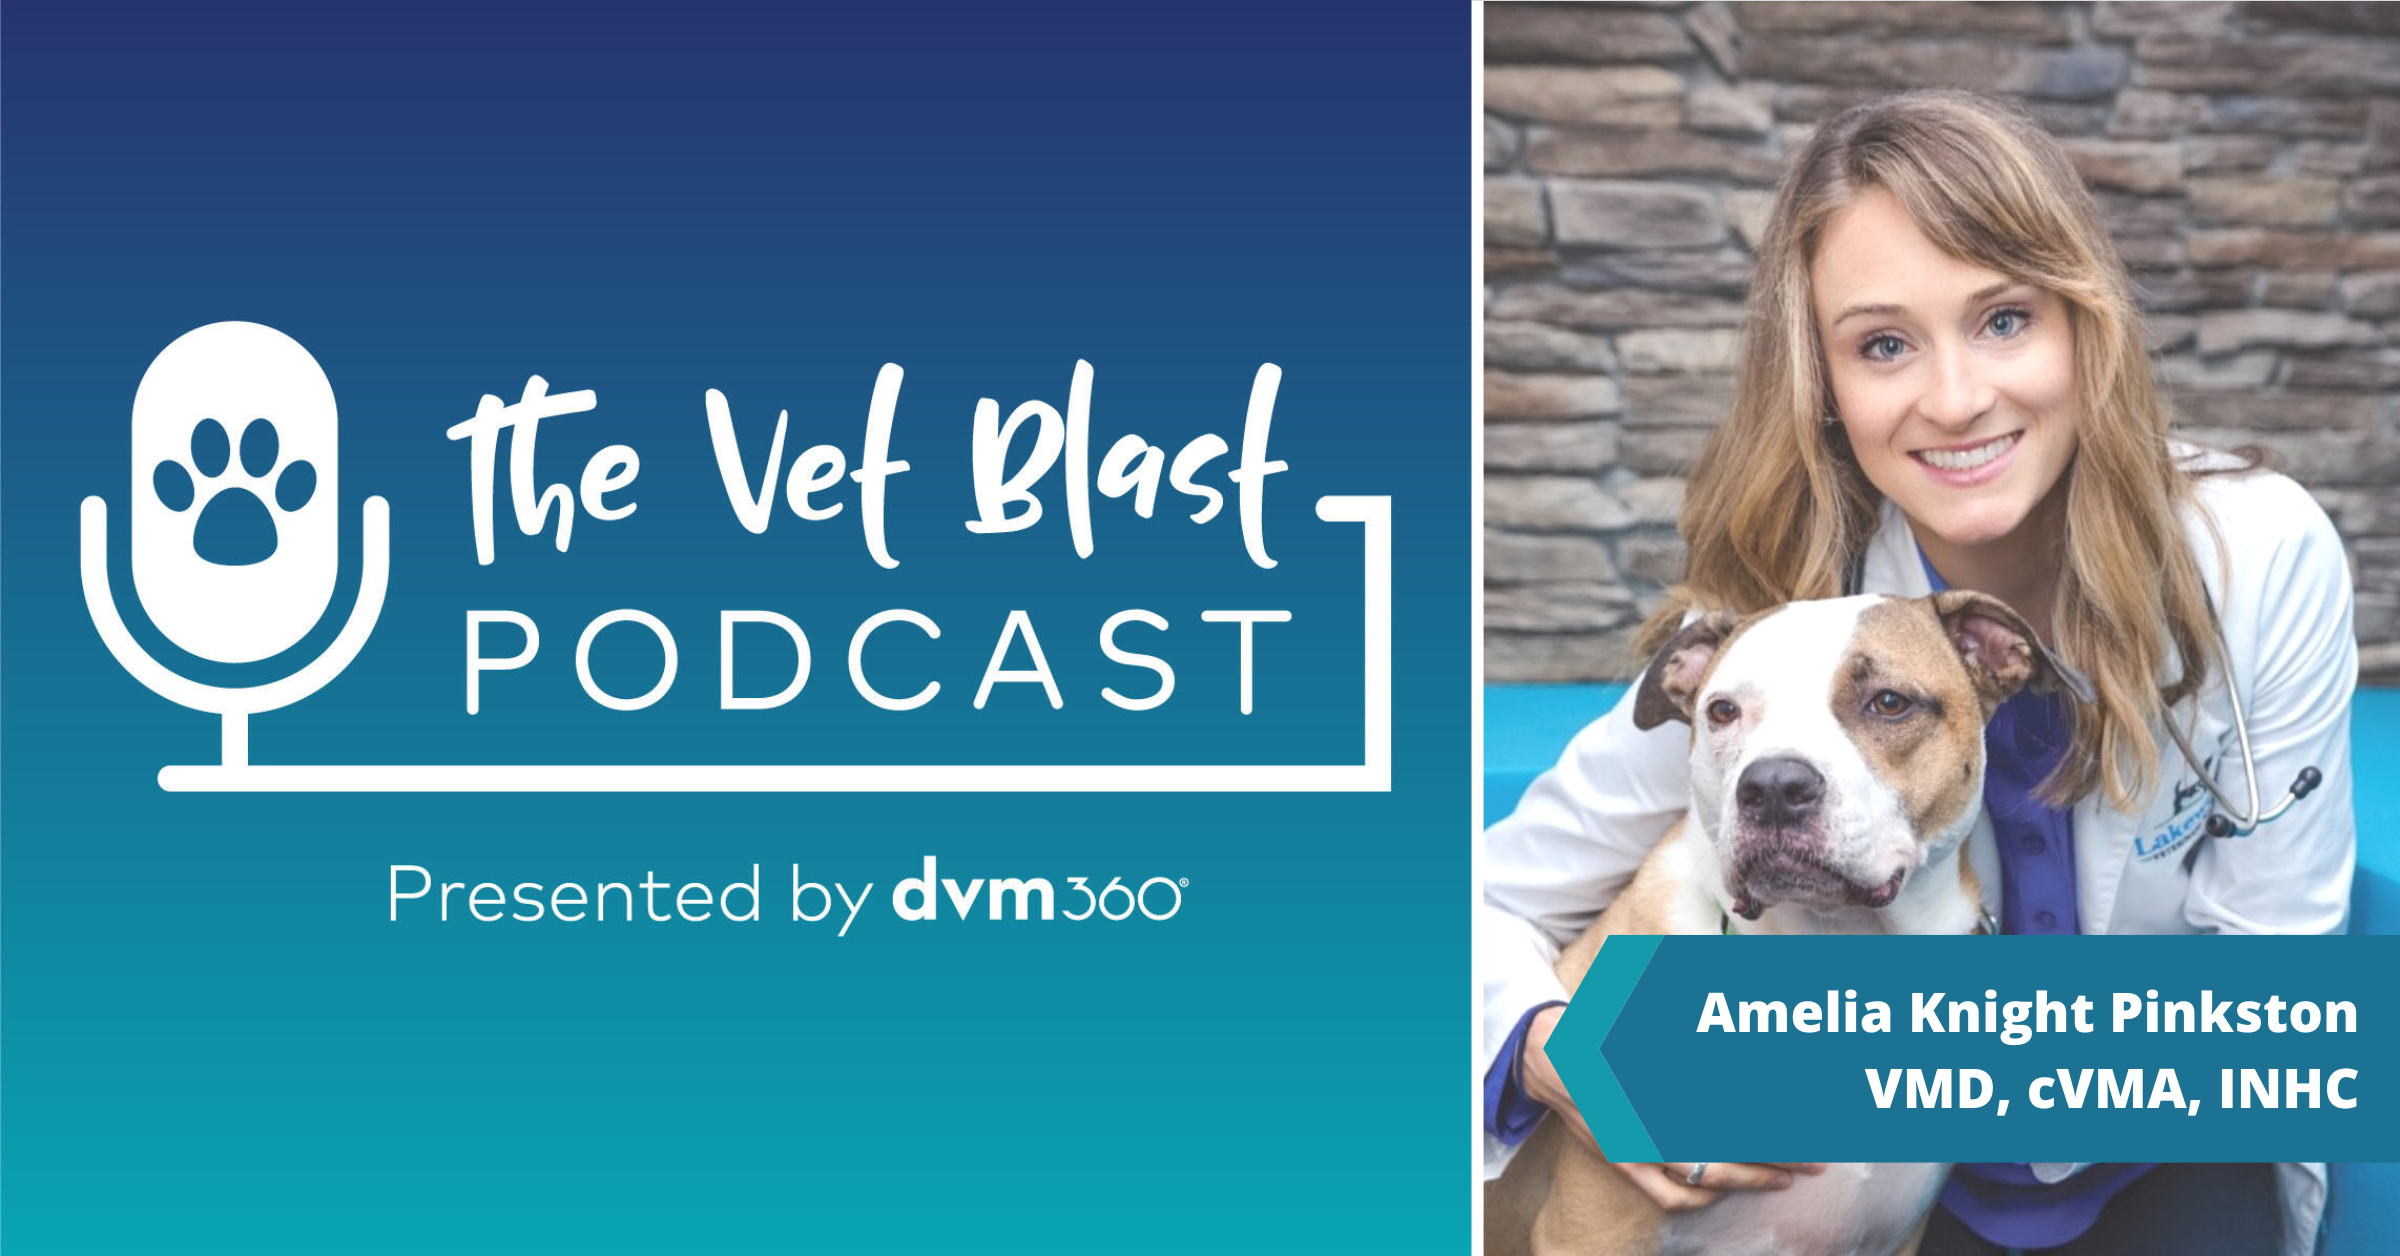 The Vet Blast Podcast with Kelly Cairns